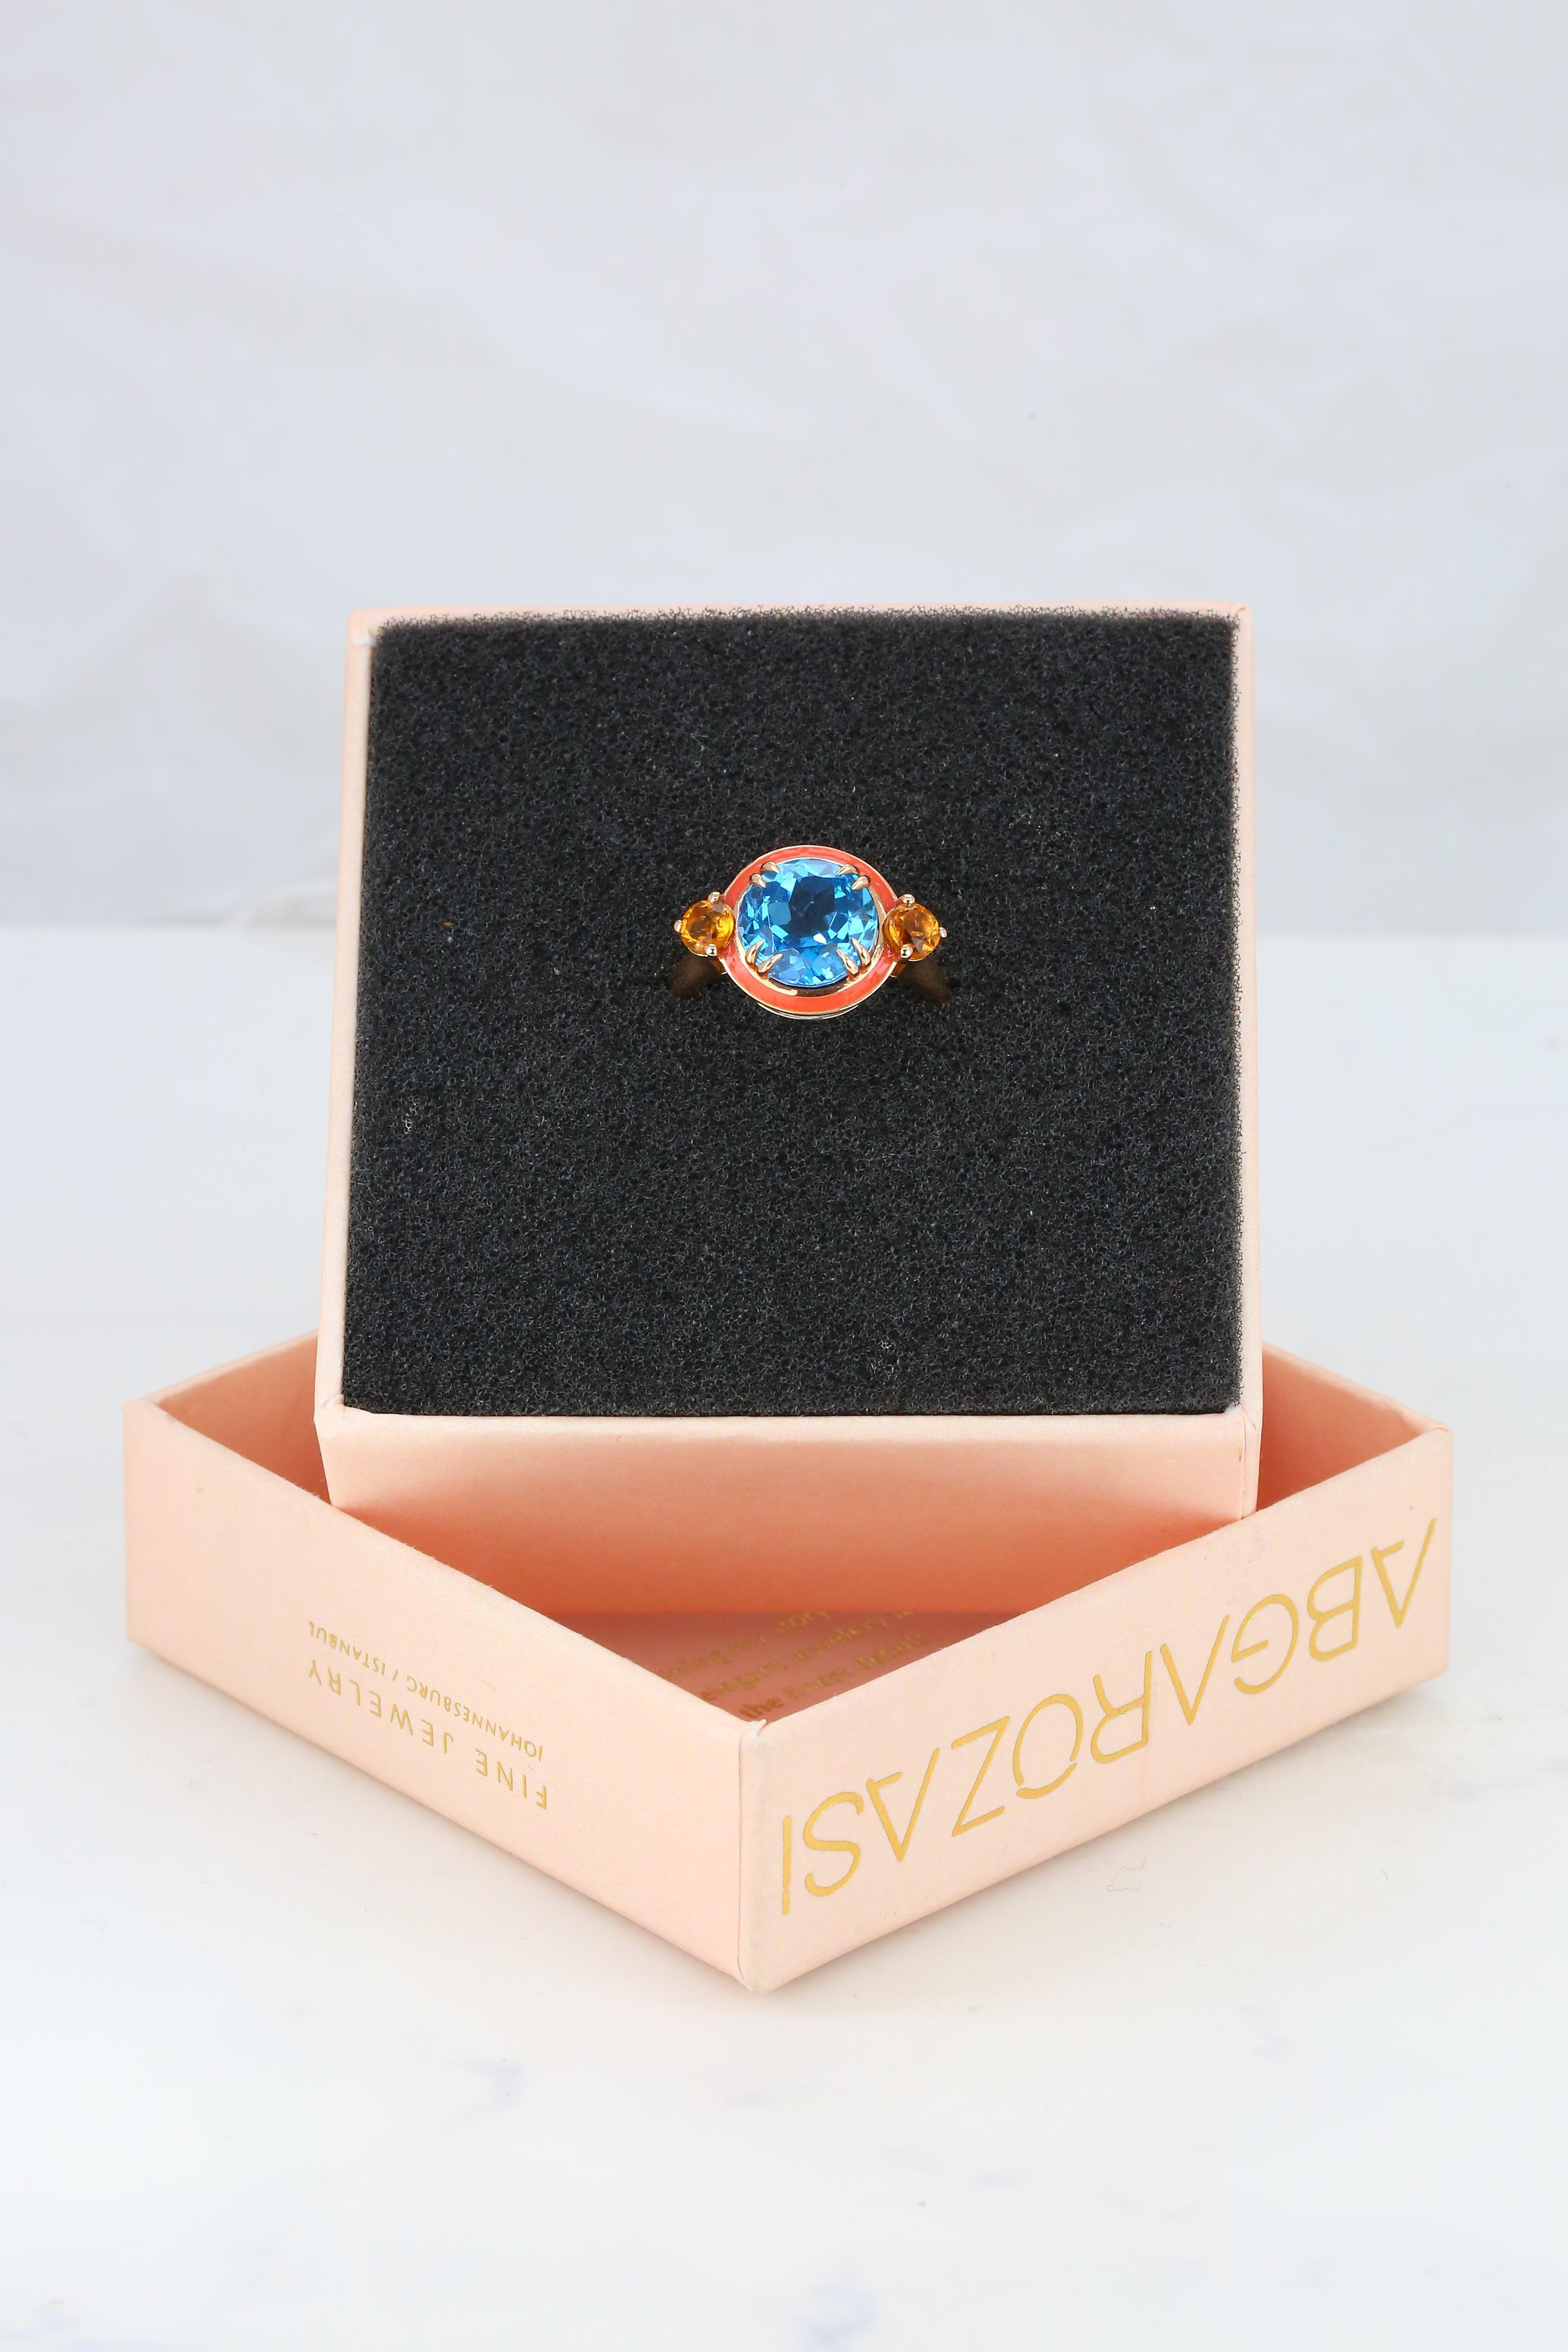 Sky Topaz And Citrine Coral Enameled Art Deco Haute Couture Design Ring
Gold metal: 14k Rose Gold
Gemstone Shape: Round Cut
Main Stone: 3.8 Carats
Side Stones: 0.22 Carats
Total Carat Weight: 4.02 Carats
Color: Brown
Clarity: Clean
Comments: Artdeco